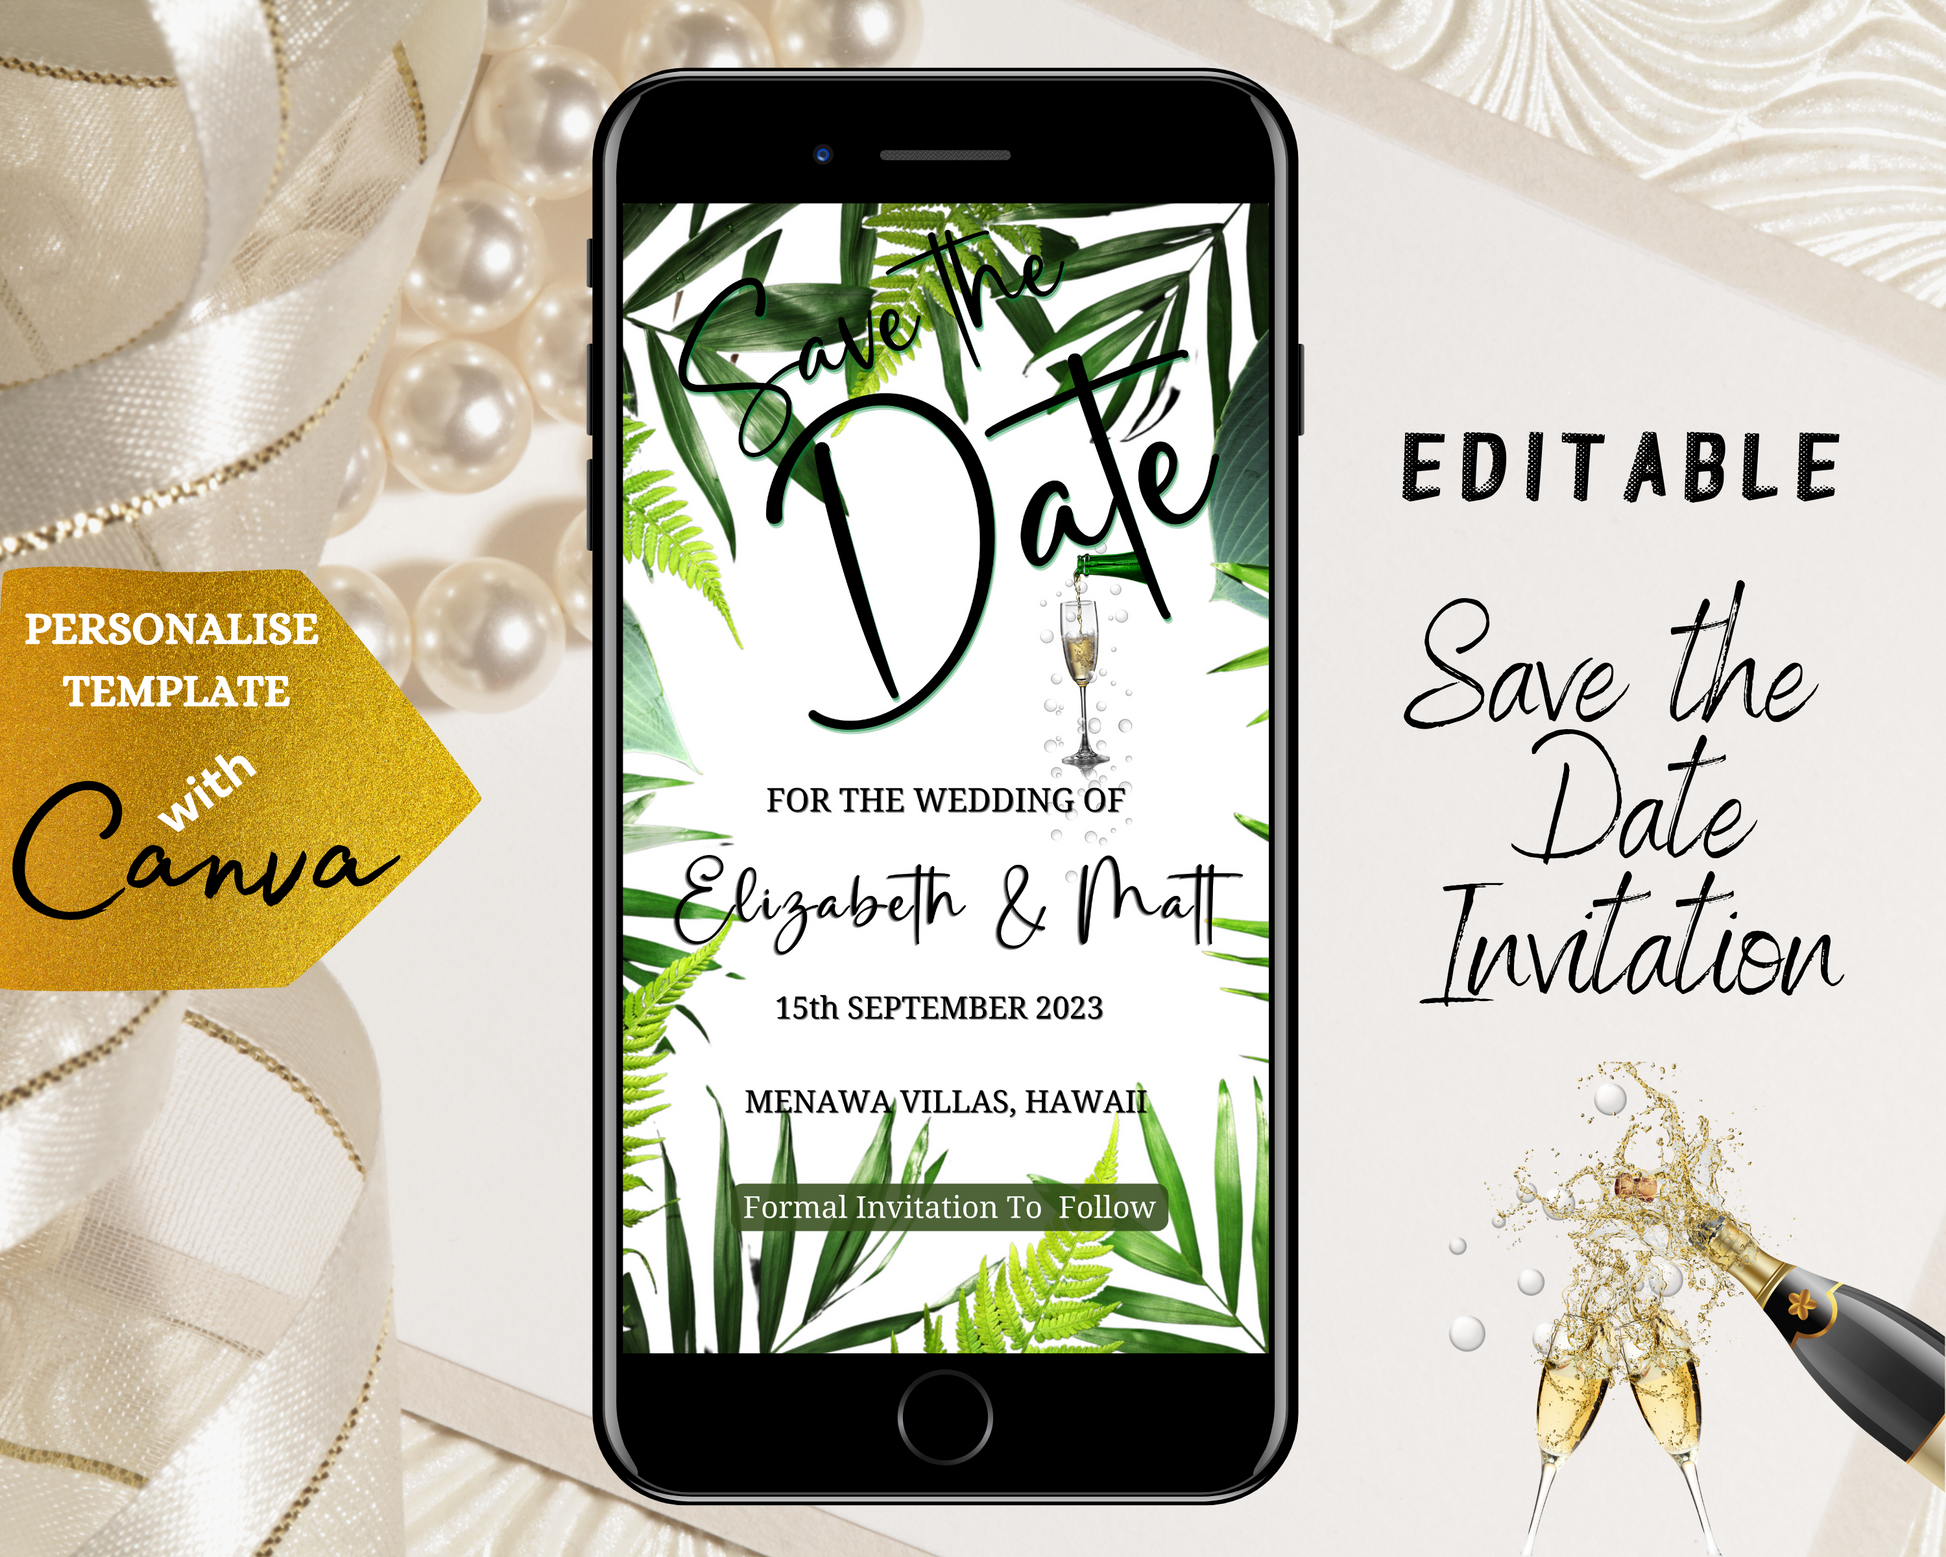 White Tropical Destination Save The Date Wedding Evite displayed on a smartphone, featuring a green leaf design and an editable invitation template.